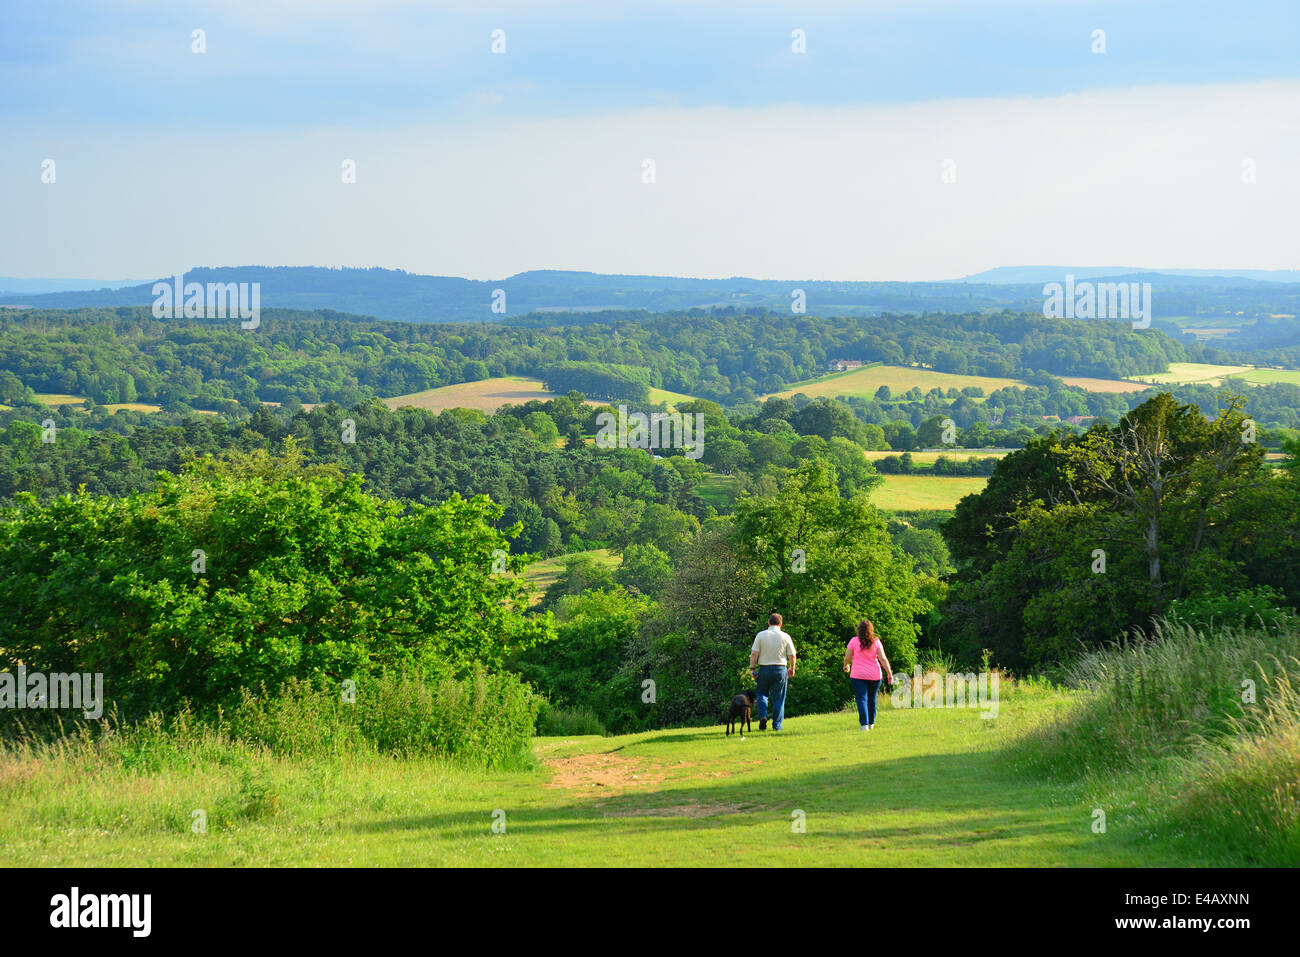 Newlands Corner natural beauty spot on Albury Downs, North Downs, near Guildford, Surrey, England, United Kingdom Stock Photo